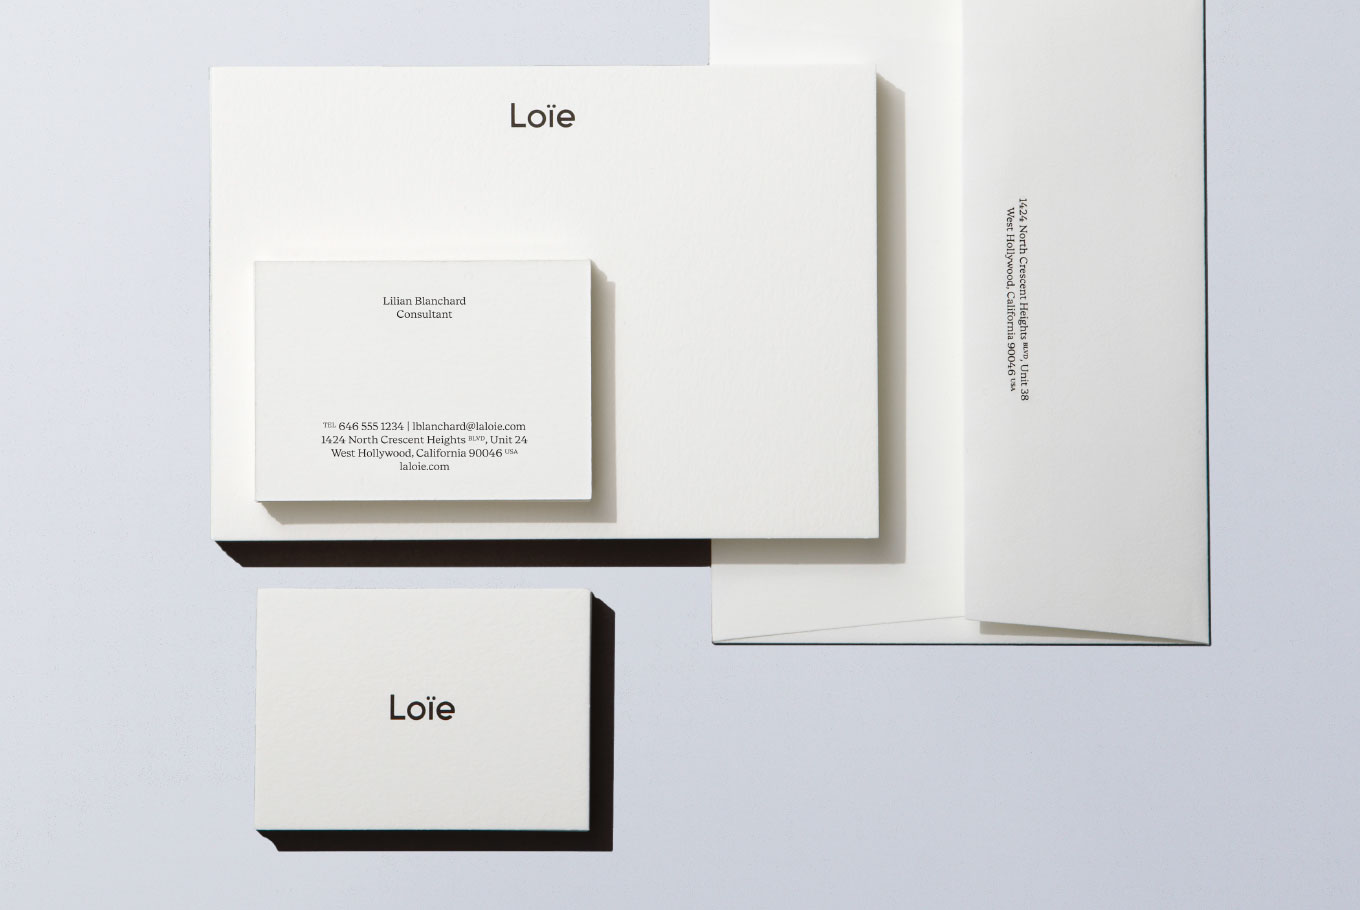 Loie stationery layout